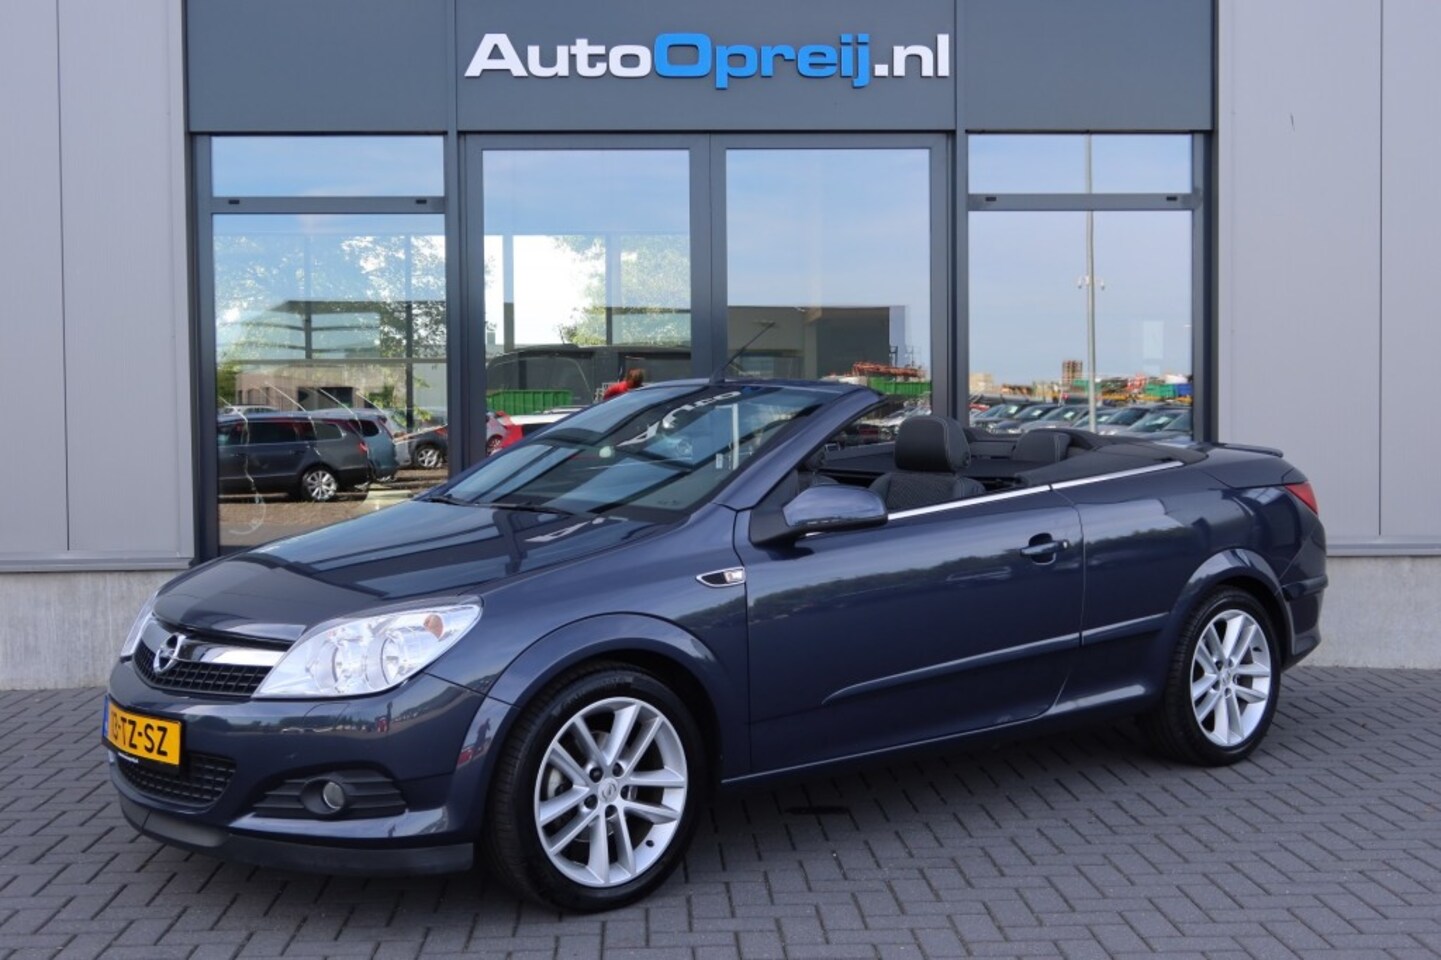 Opel Astra TwinTop - TwinTop 1.8 Cosmo Airco, Cruise, Half Leder, PDC achter, Trekhaa - AutoWereld.nl